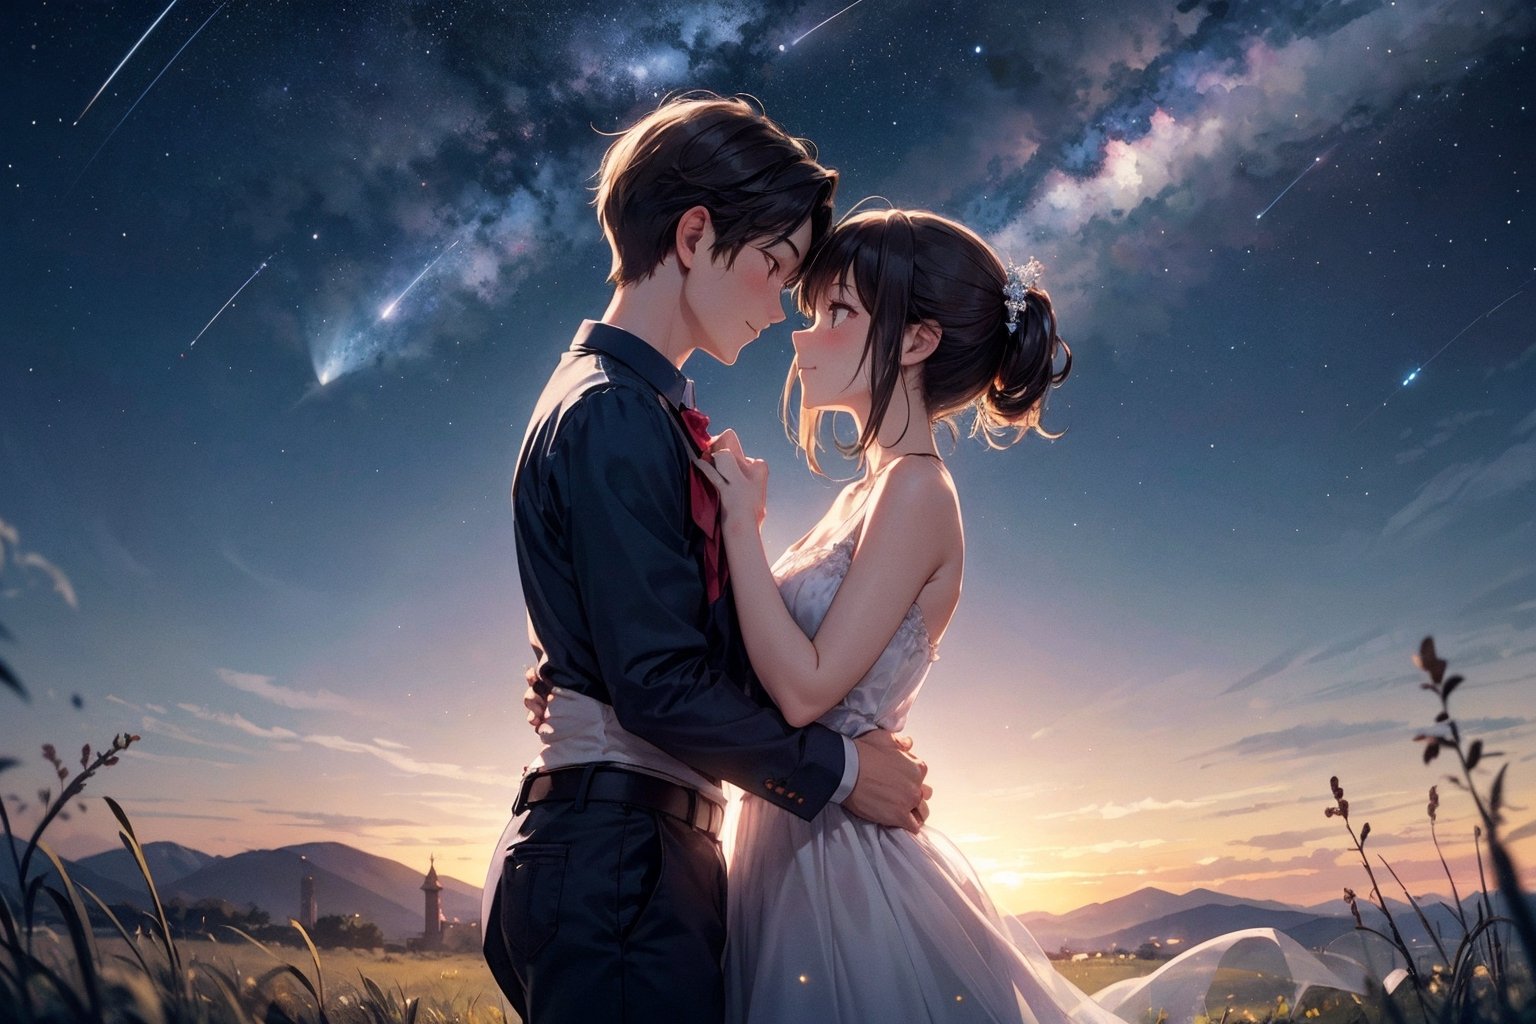 "A romantic night scene rendered in a blend of 3DCG and watercolor style, featuring a young couple under a starry sky. The boy and girl are standing close together, gazing up at a brilliant shooting star that illuminates the sky. The girl's smile shines brightly as the stars twinkle around them. The night sky is filled with countless stars, creating a magical and serene atmosphere. The couple's hearts are united, symbolized by the shooting star tying their dreams together. The background includes gentle rolling hills and a calm, expansive meadow, adding to the peaceful and romantic setting. The colors should be soft and dreamy, with watercolor textures blending seamlessly with the 3DCG elements. Focus on the glowing shooting star, the tender expressions of the couple, and the ethereal quality of the scene."